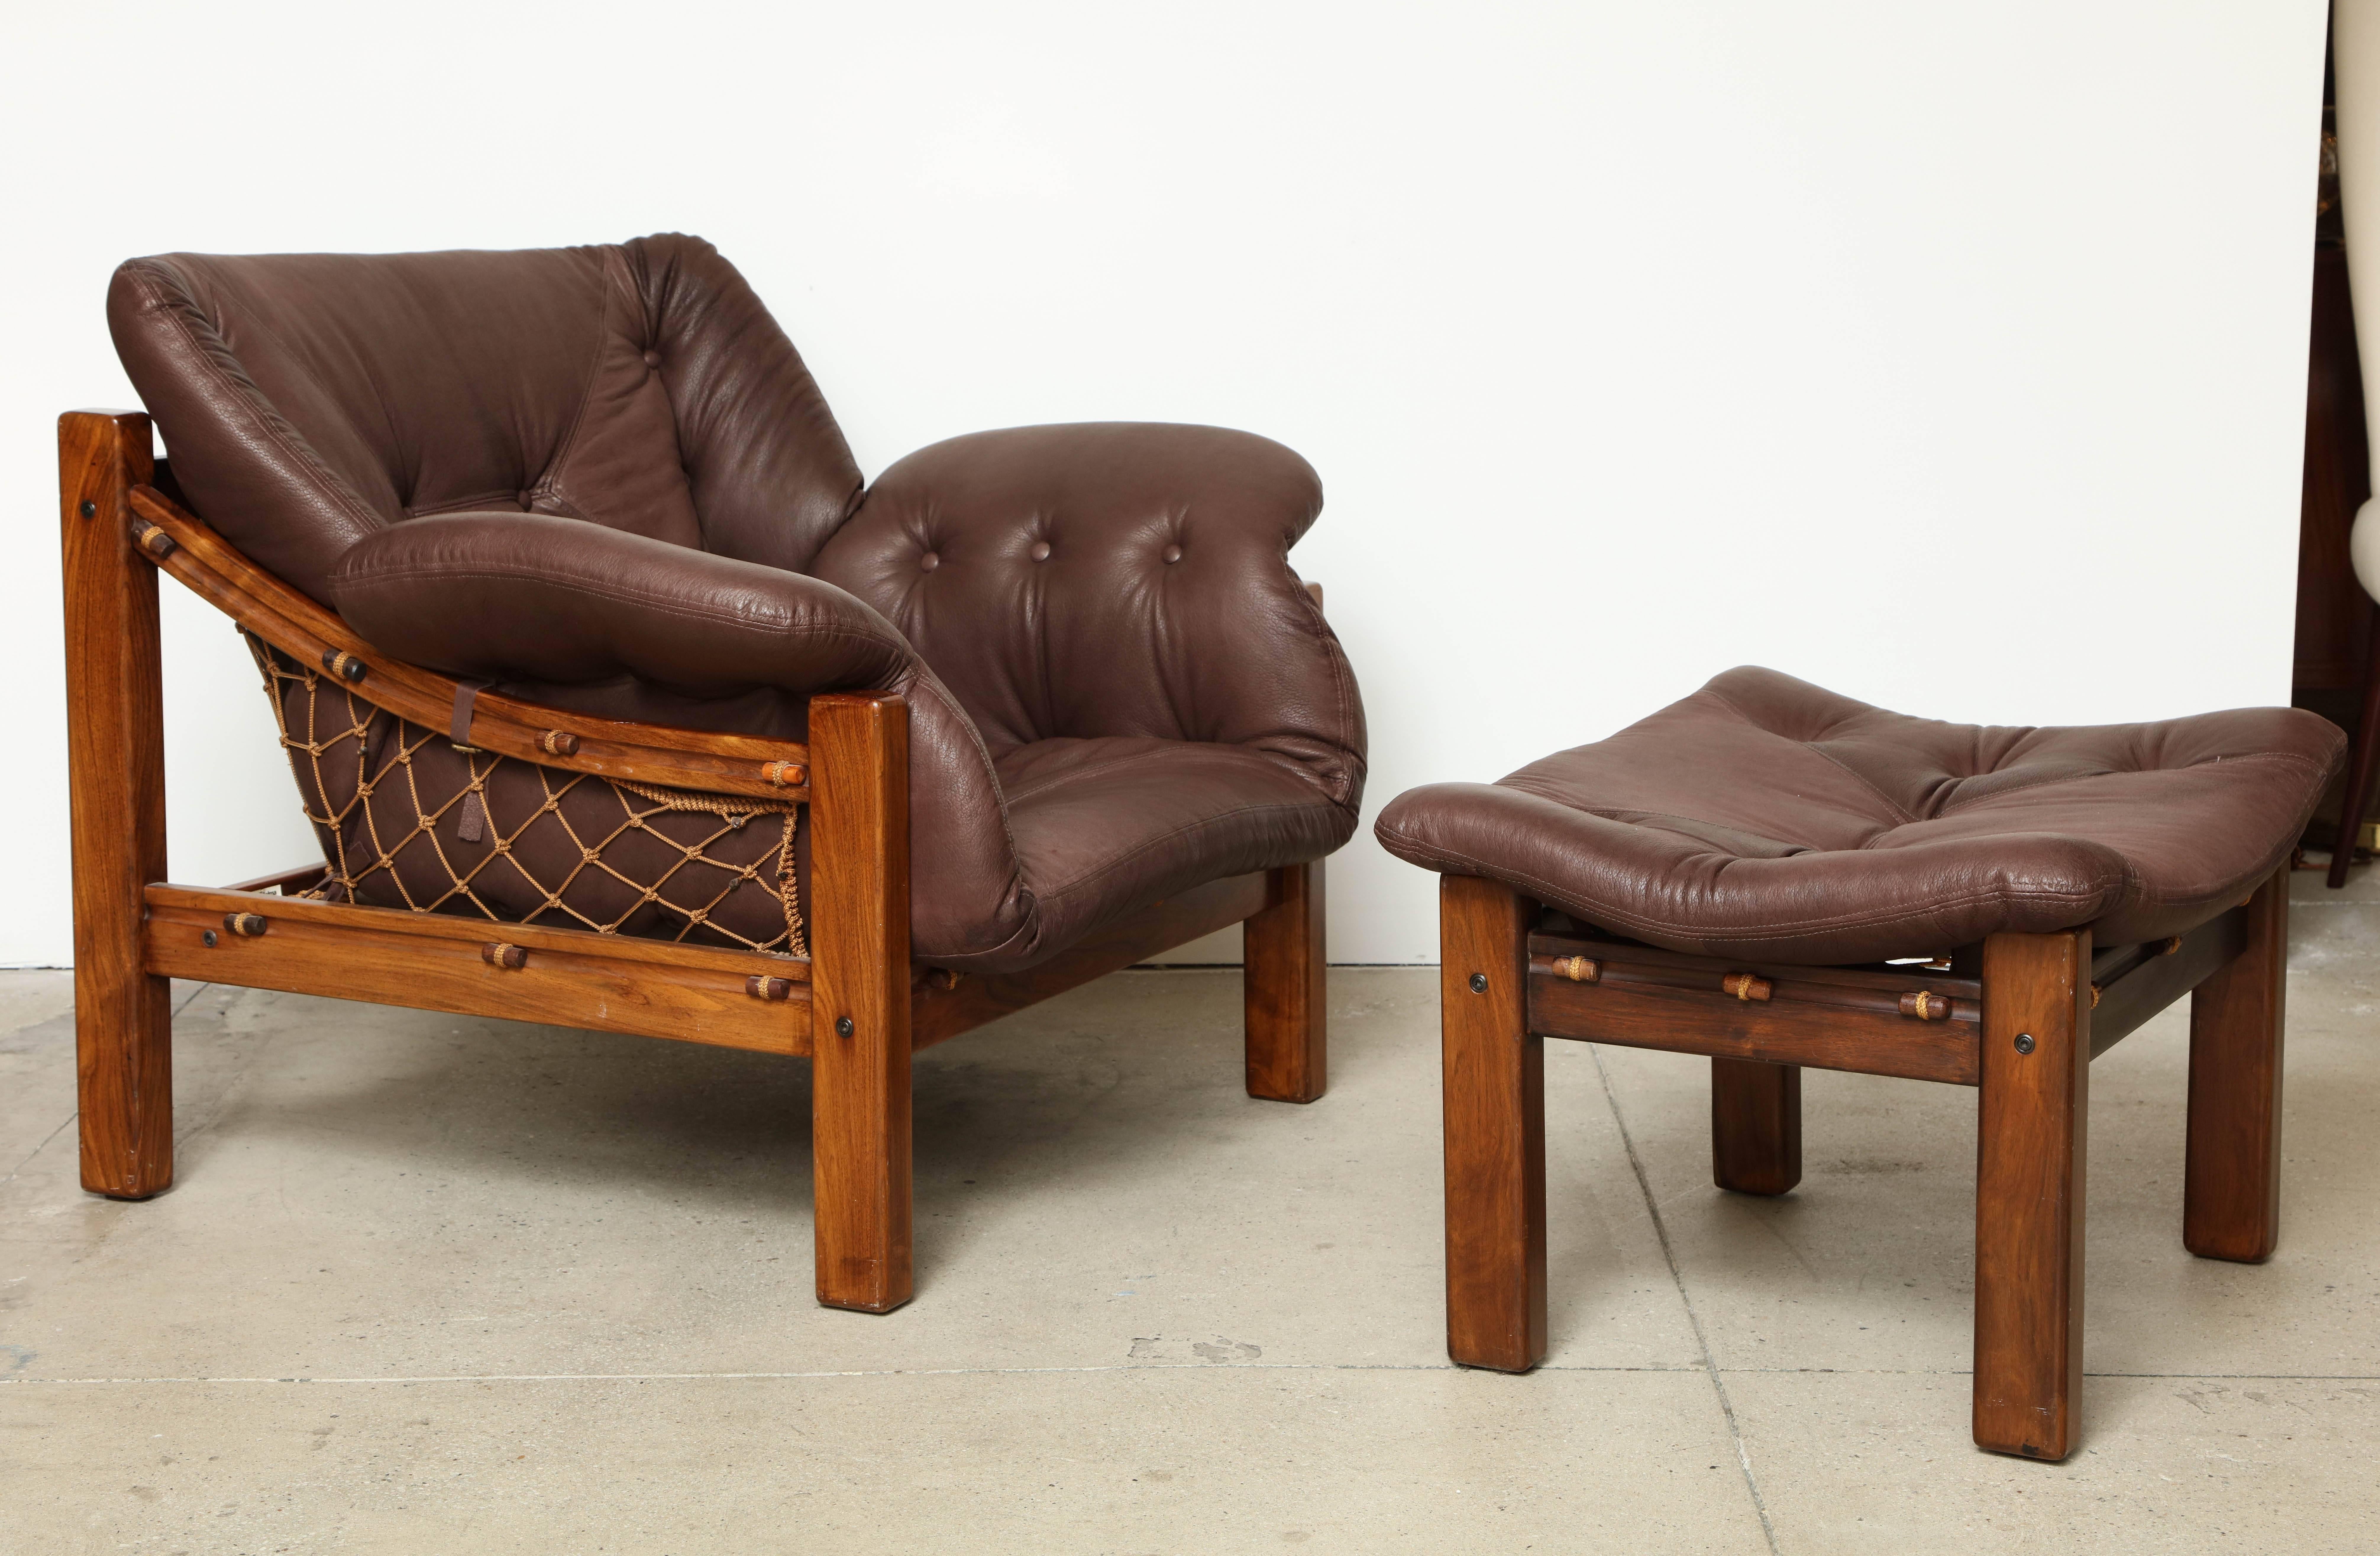 Jean Gillon rosewood chair and ottoman set for Italma of Brazil, circa 1960 with new leather upholstered cushions.